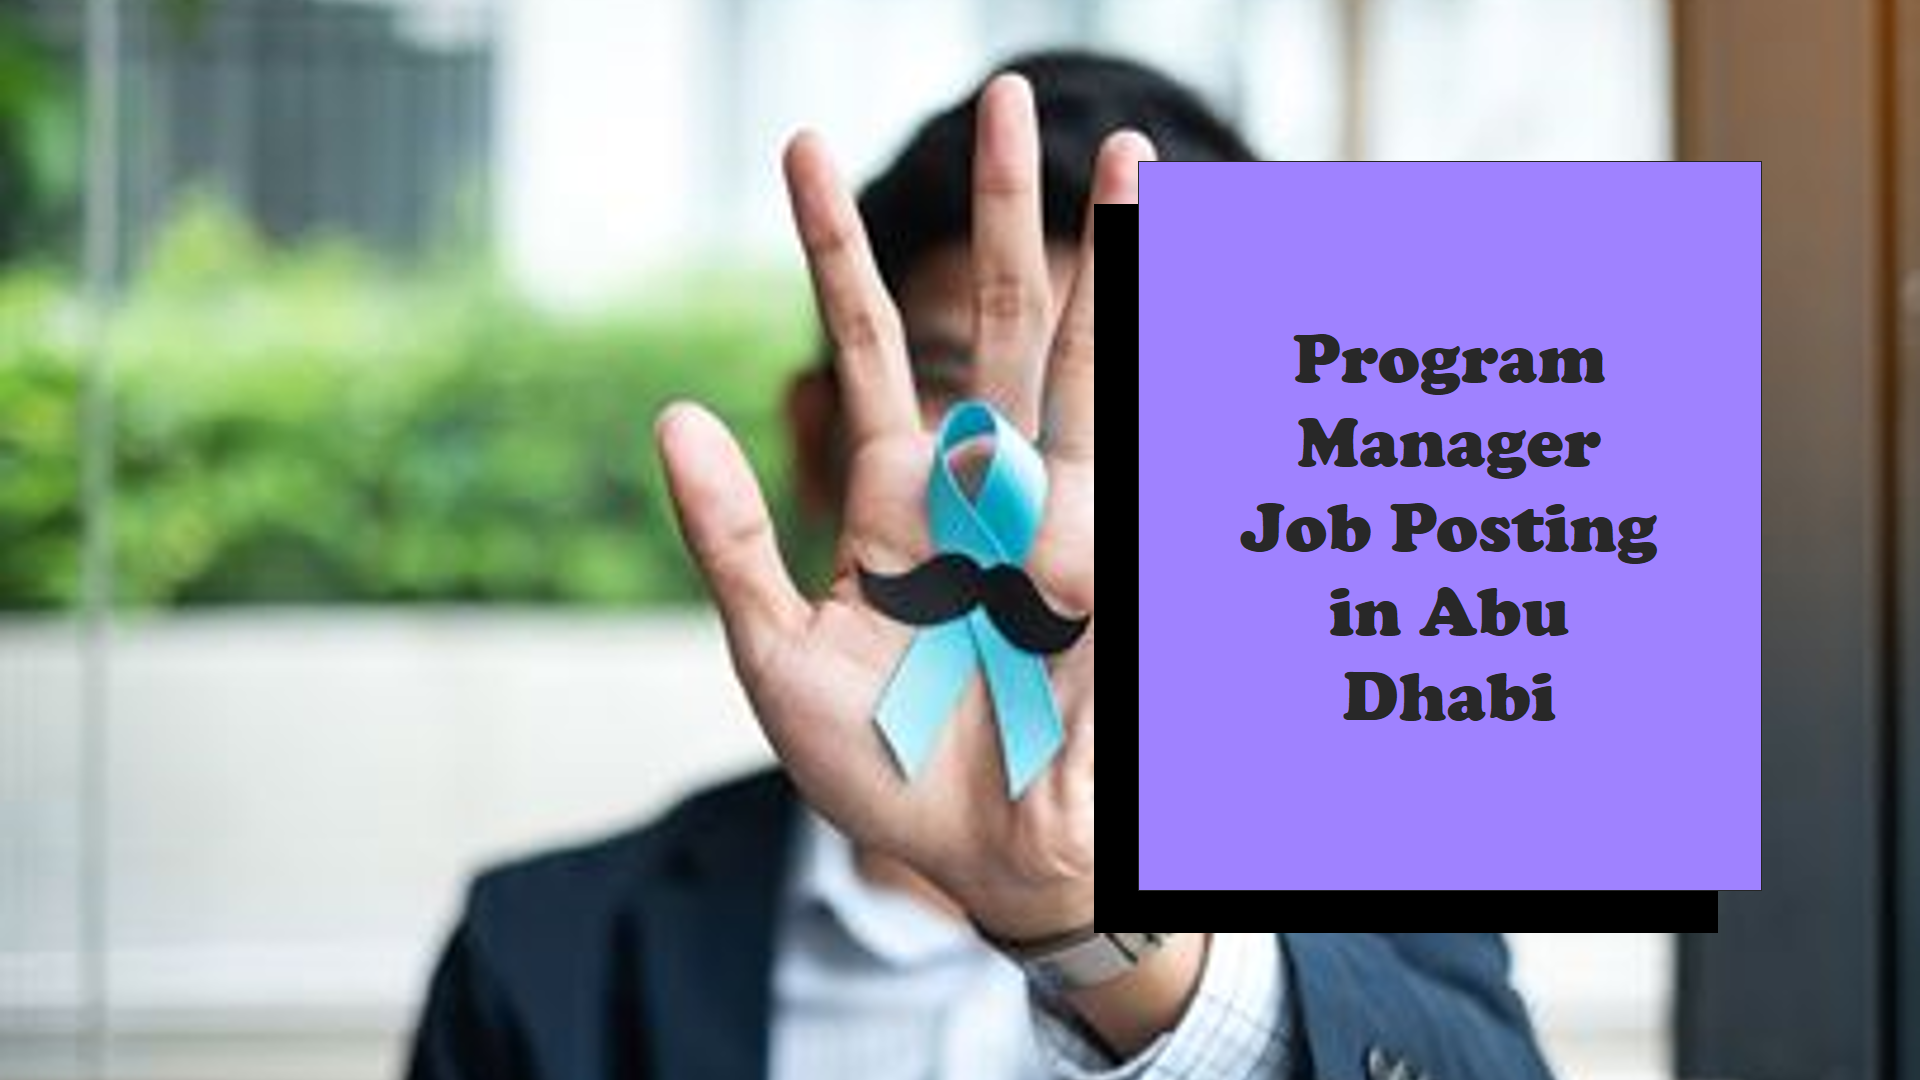 Program Manager jobs in Abu Dhabi for all nationalities with salary 3500 AED